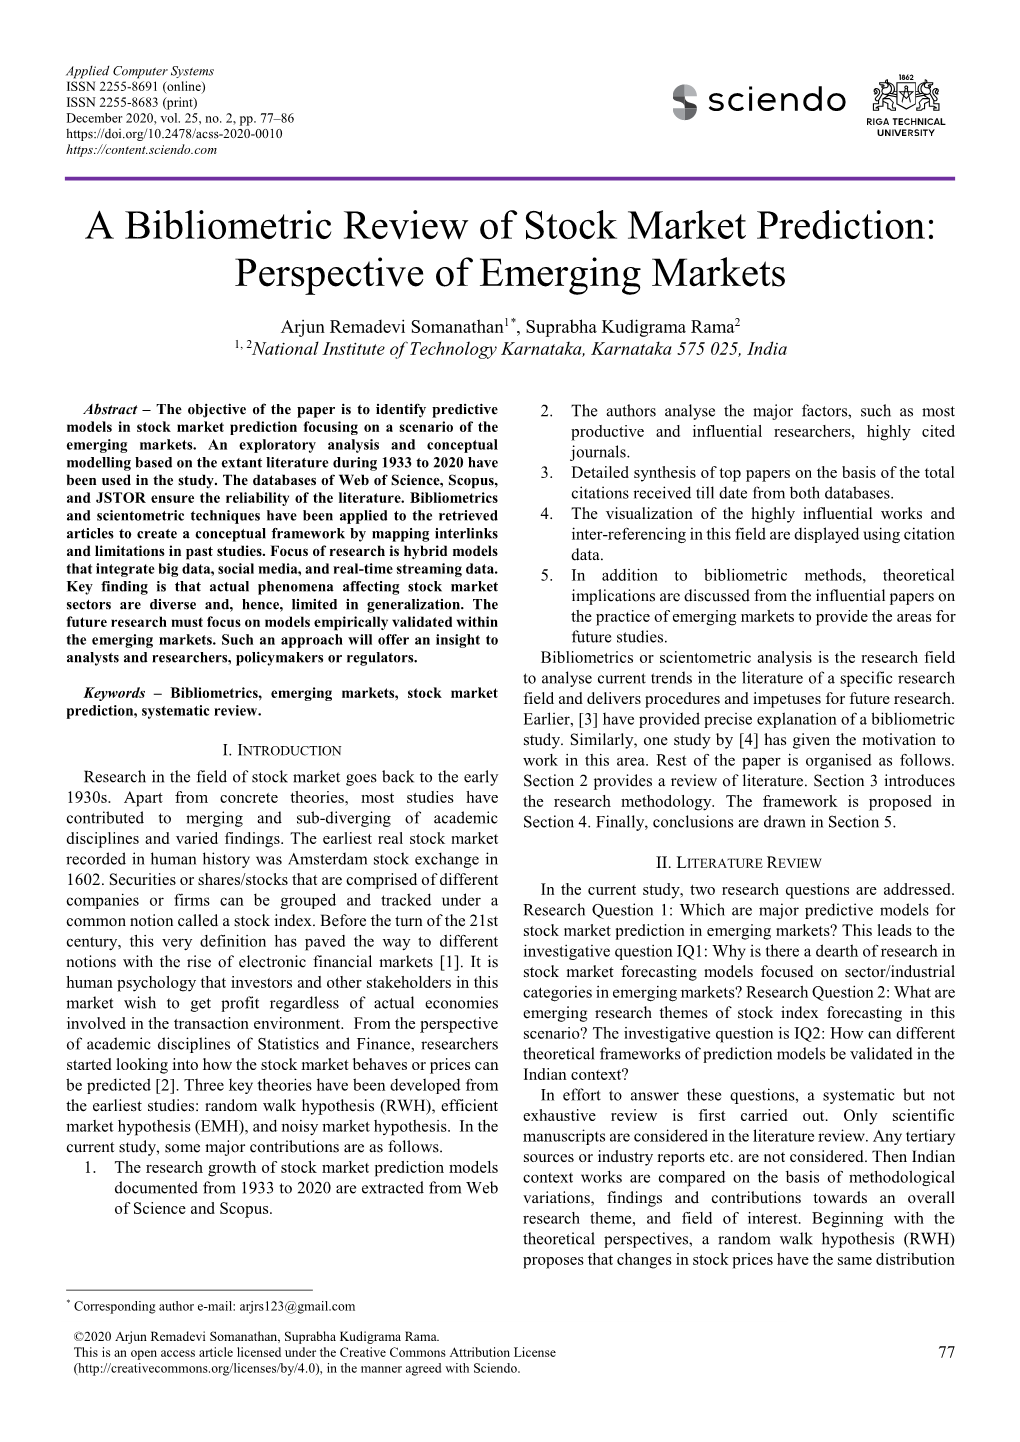 A Bibliometric Review of Stock Market Prediction: Perspective of Emerging Markets